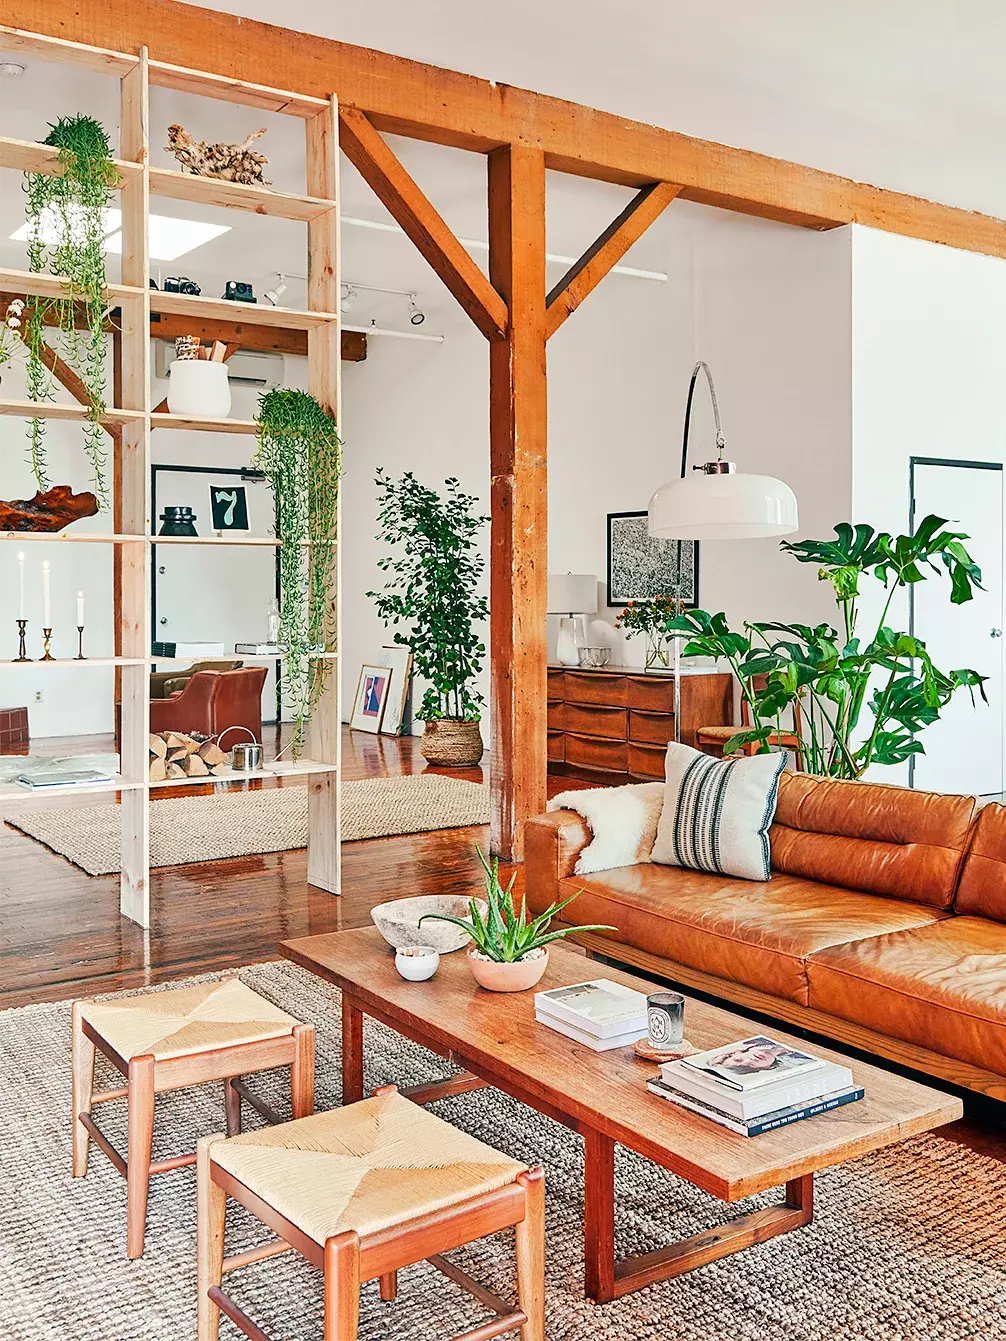 61% of People Regret Designing Their Home in This Style